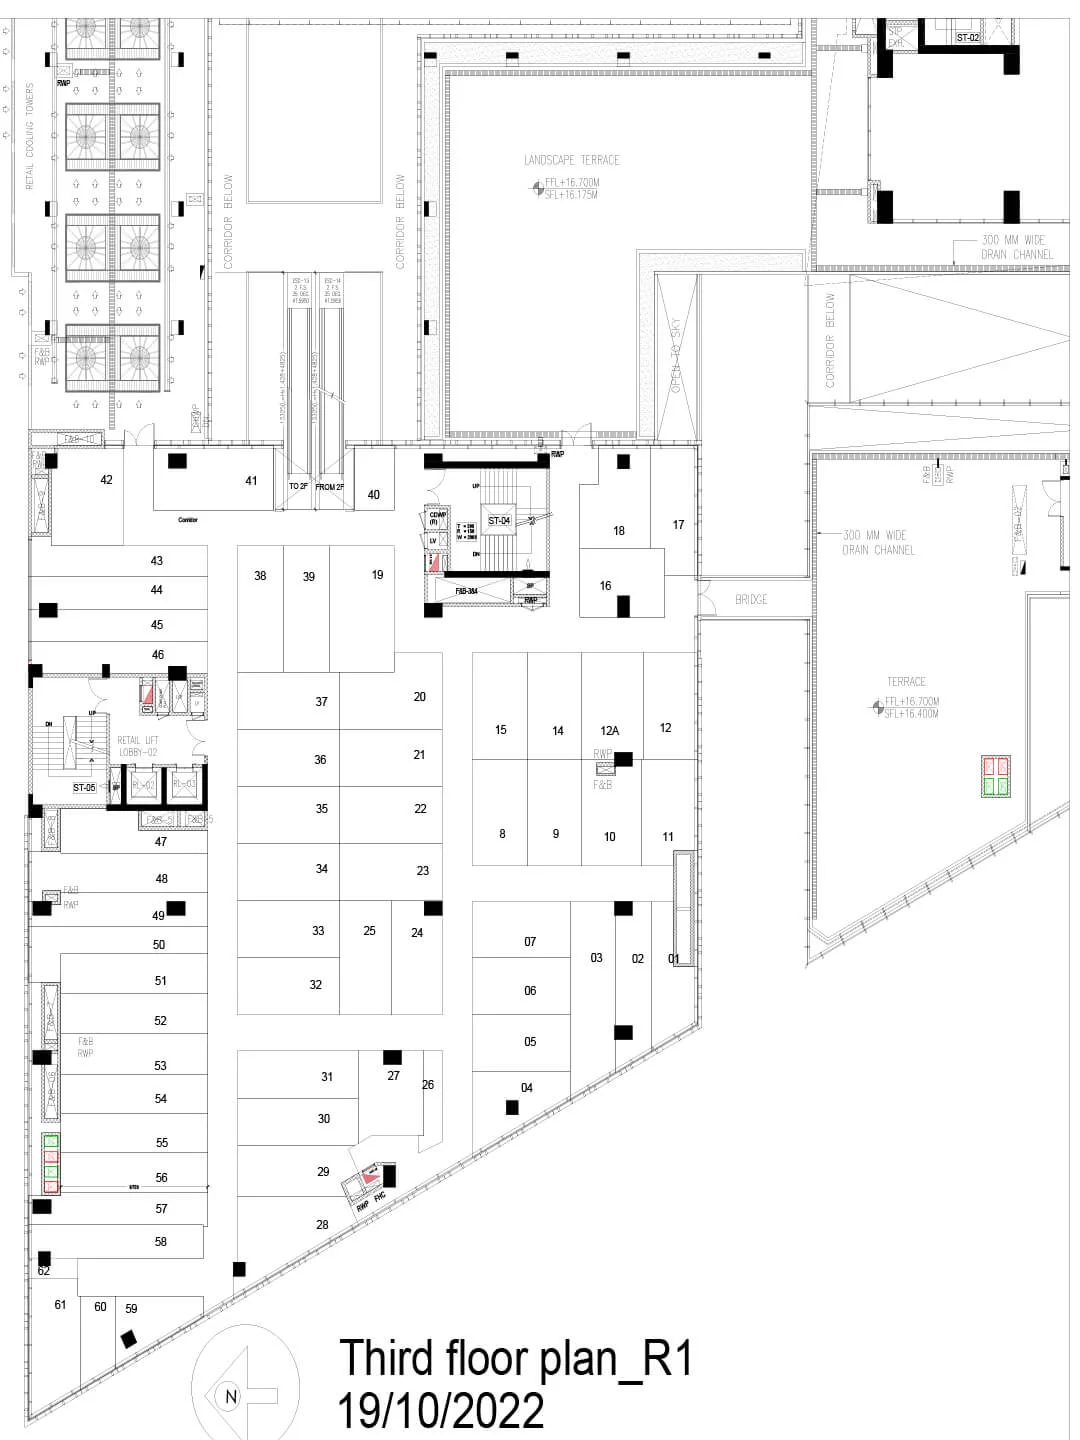 Third floor project layout by AIPL